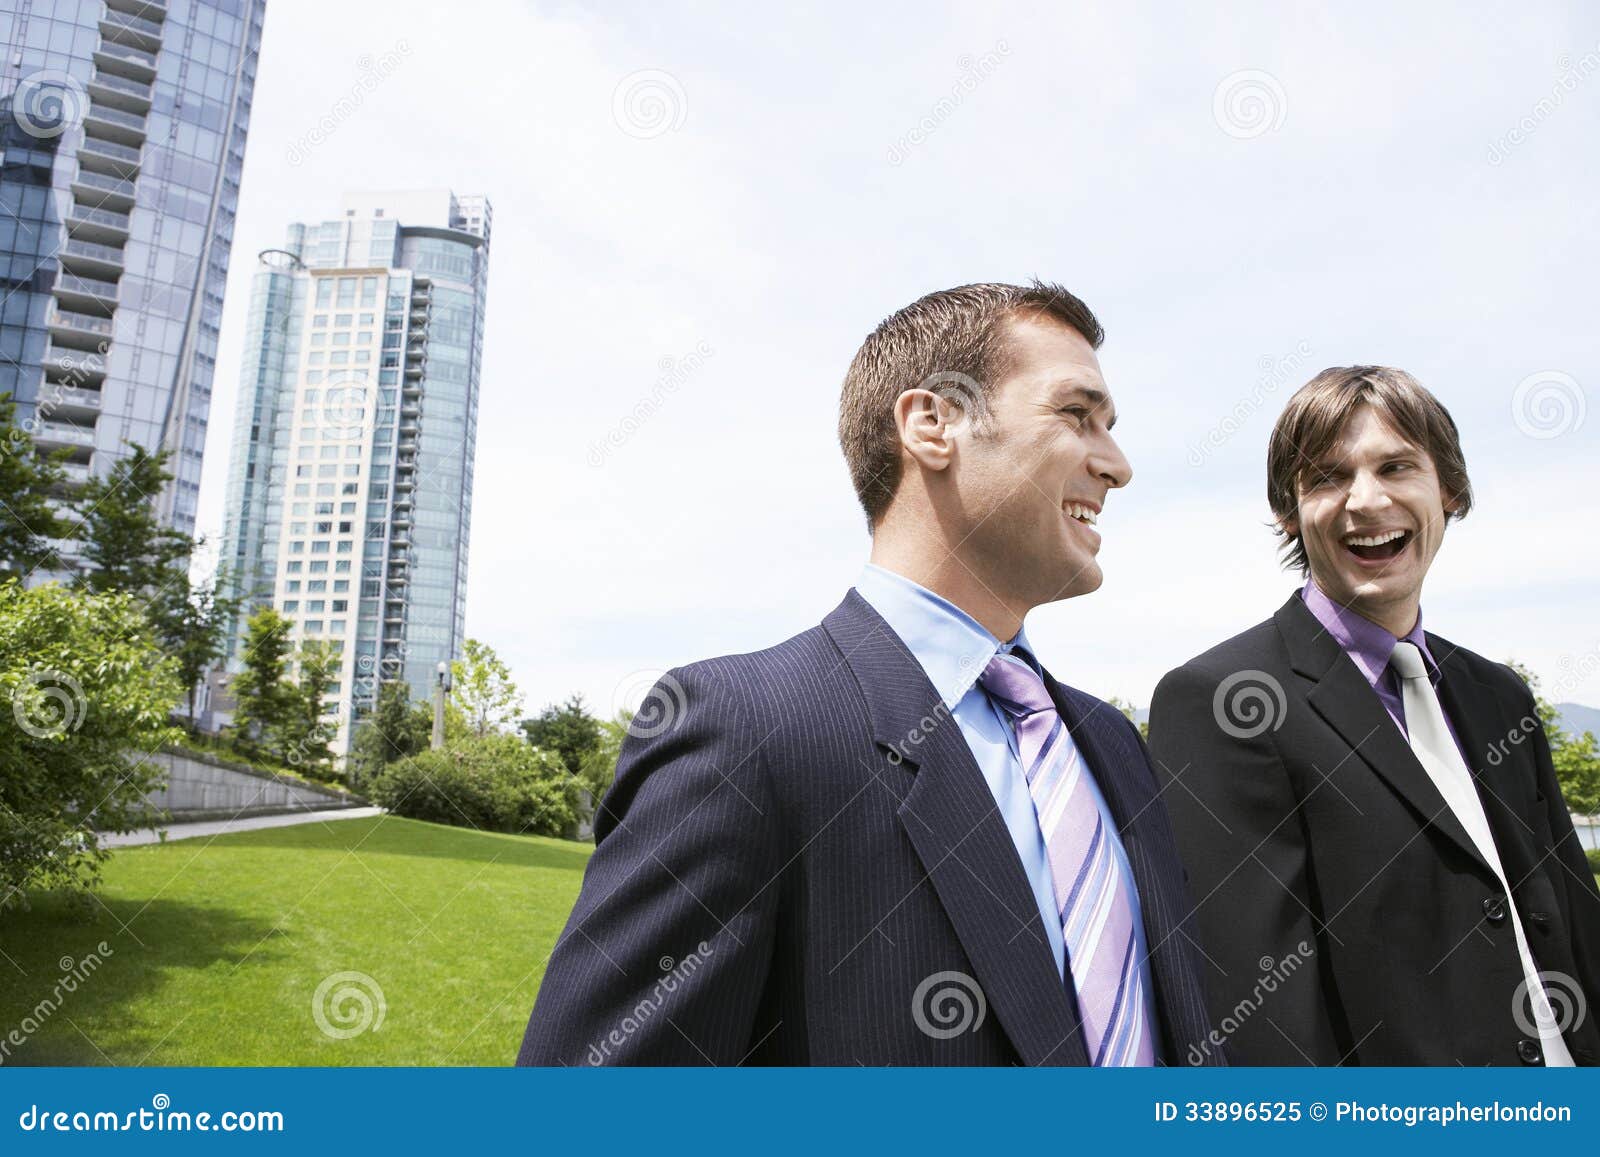 businessmen laughing by office buildings